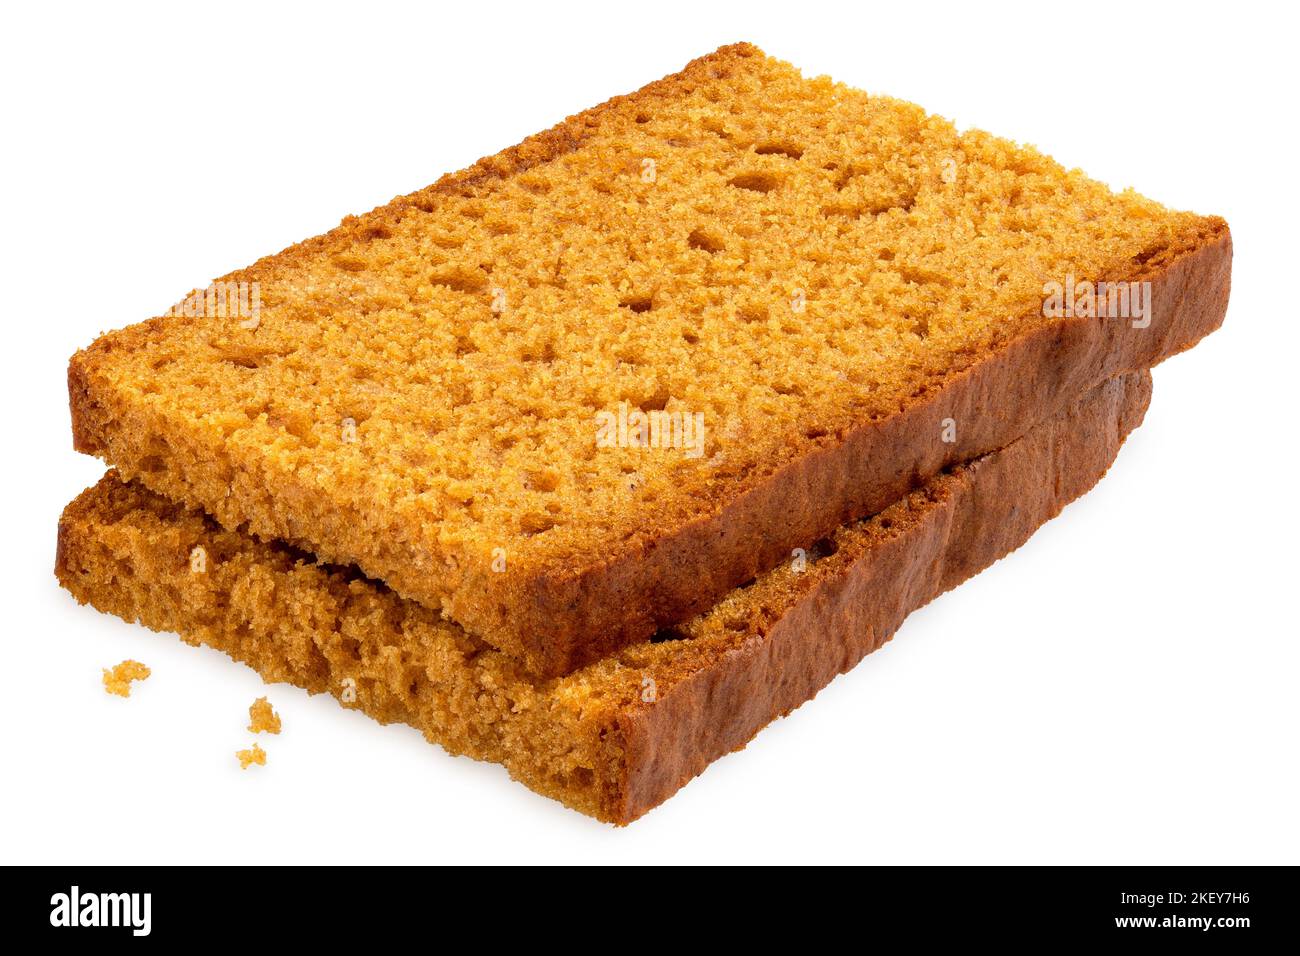 Stack of two slices of spiced honey cake isolated on white. Stock Photo